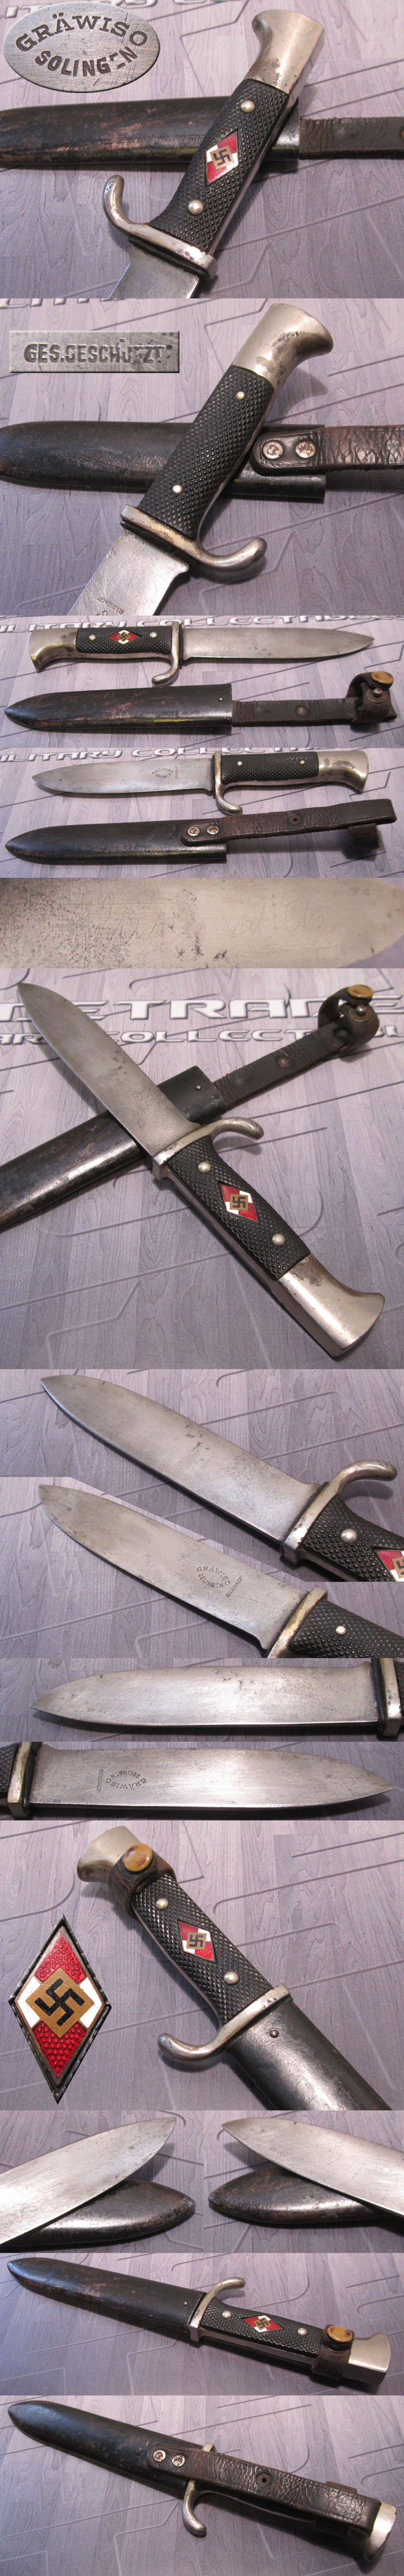 Early Hitler Youth Dagger by Grawiso